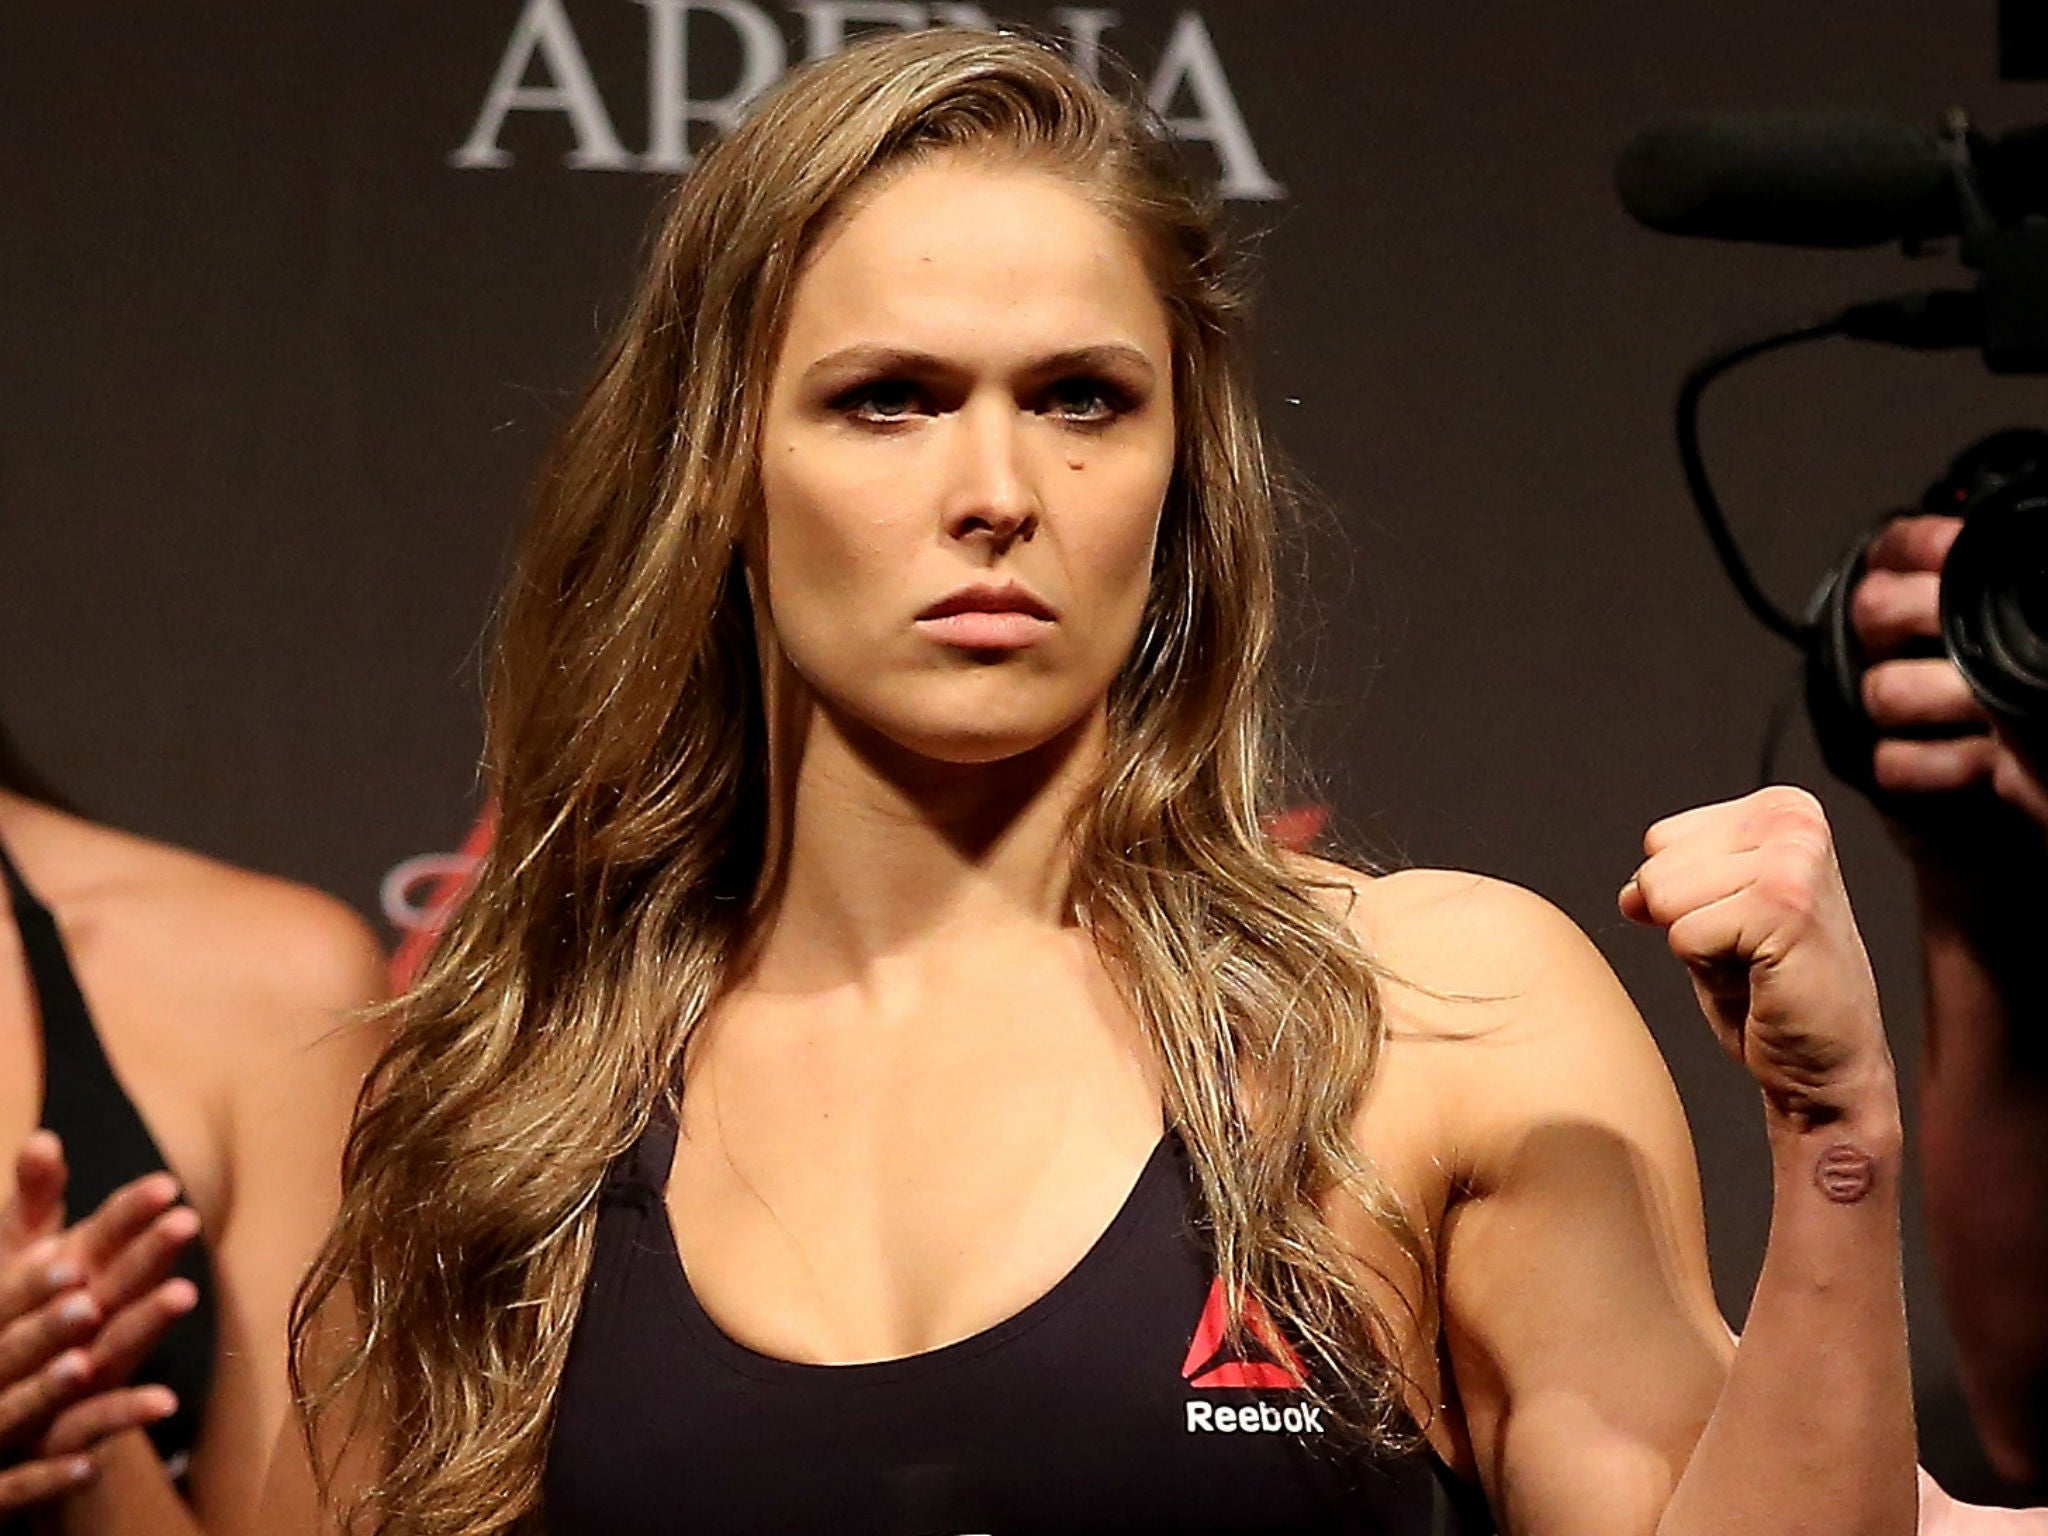 Rousey says her sister Julia was upset following the incident